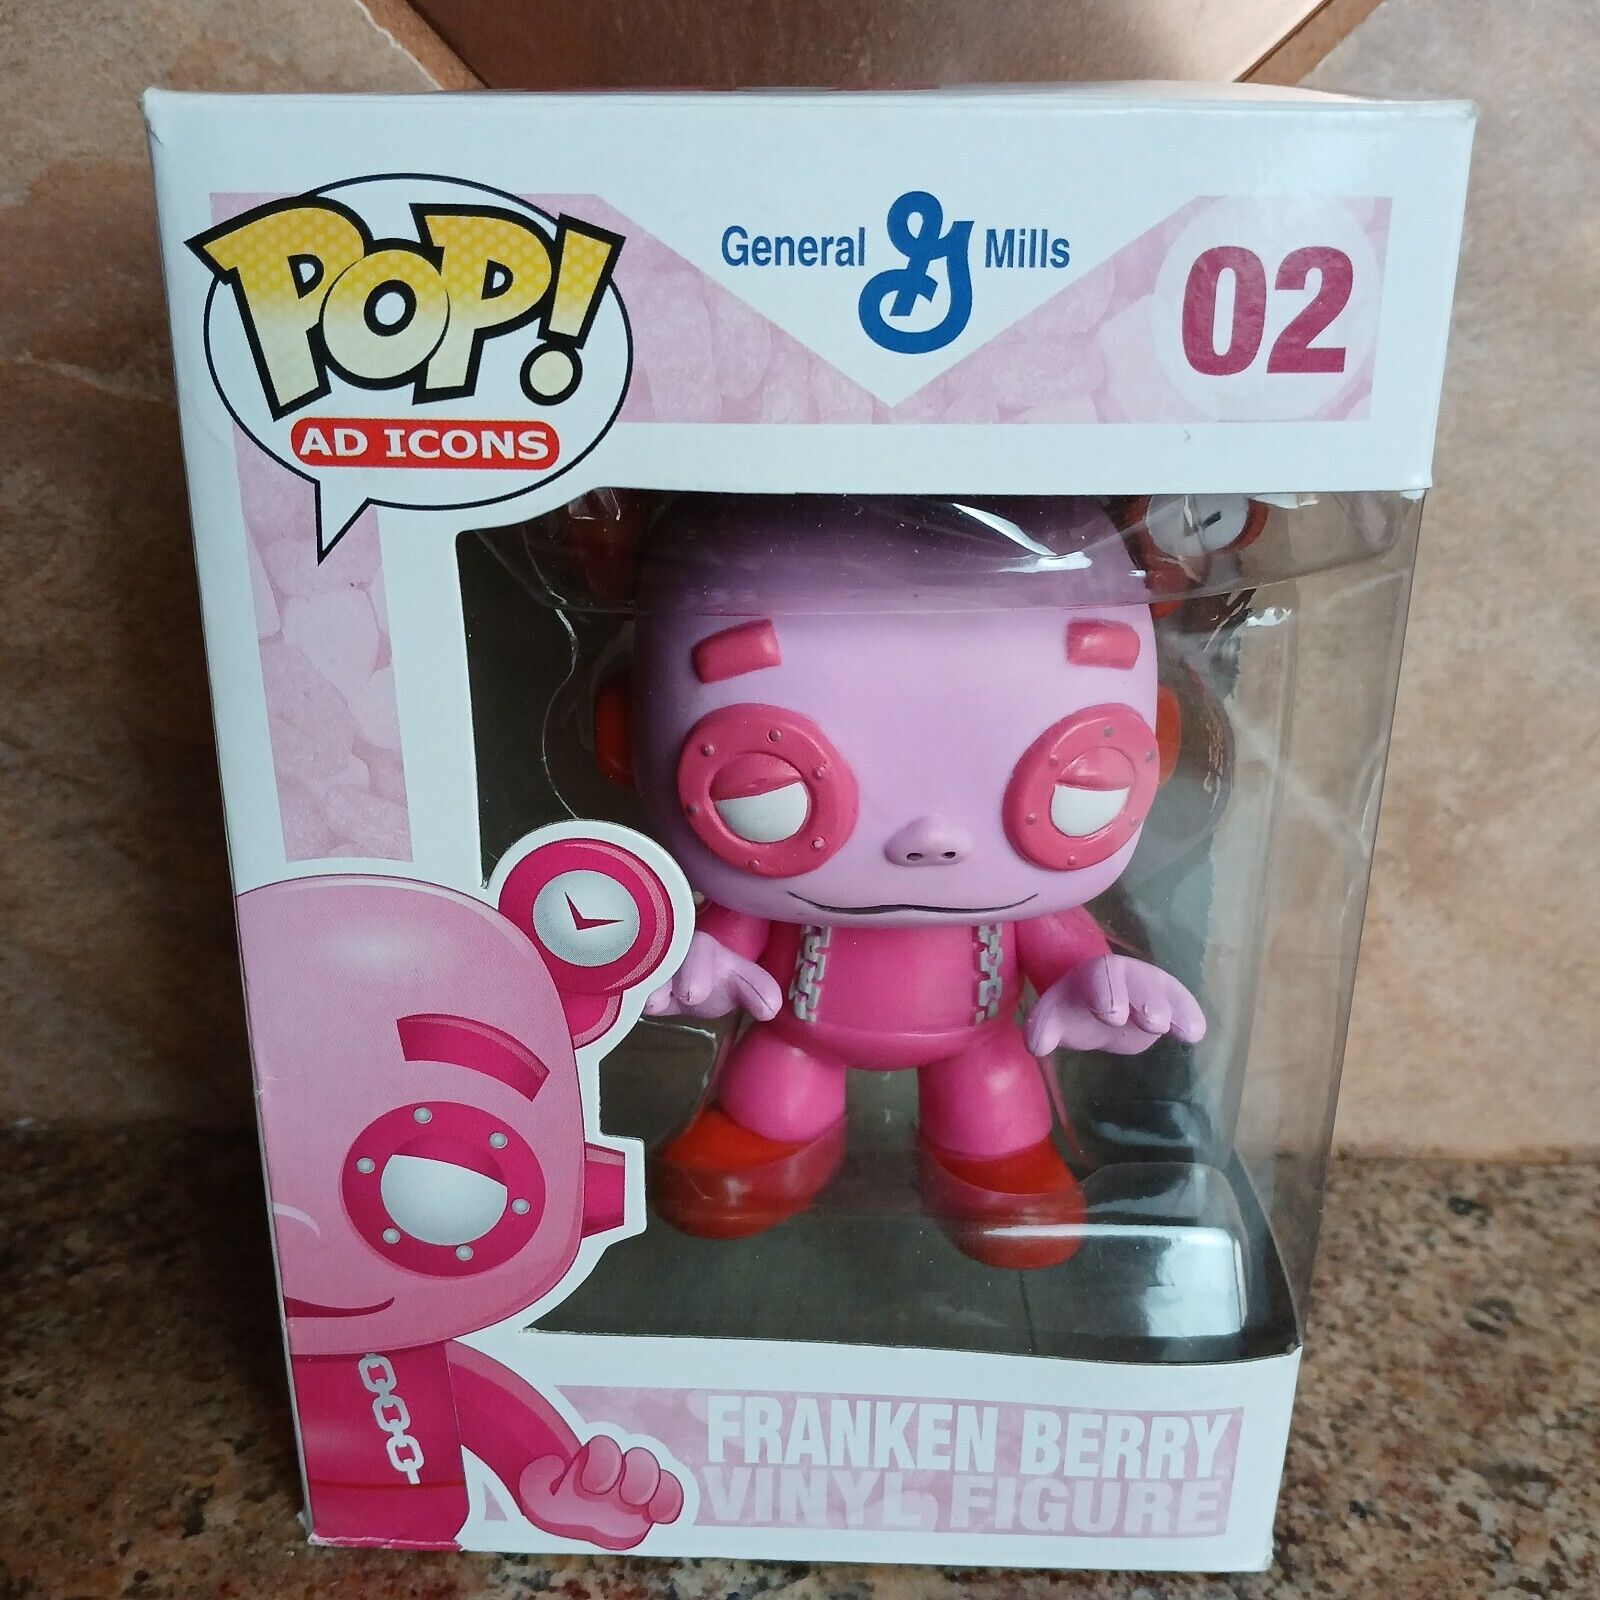 VAULTED Funko POP AD ICONS General Mills 02 FRANKEN BERRY with Protector DAMAGED